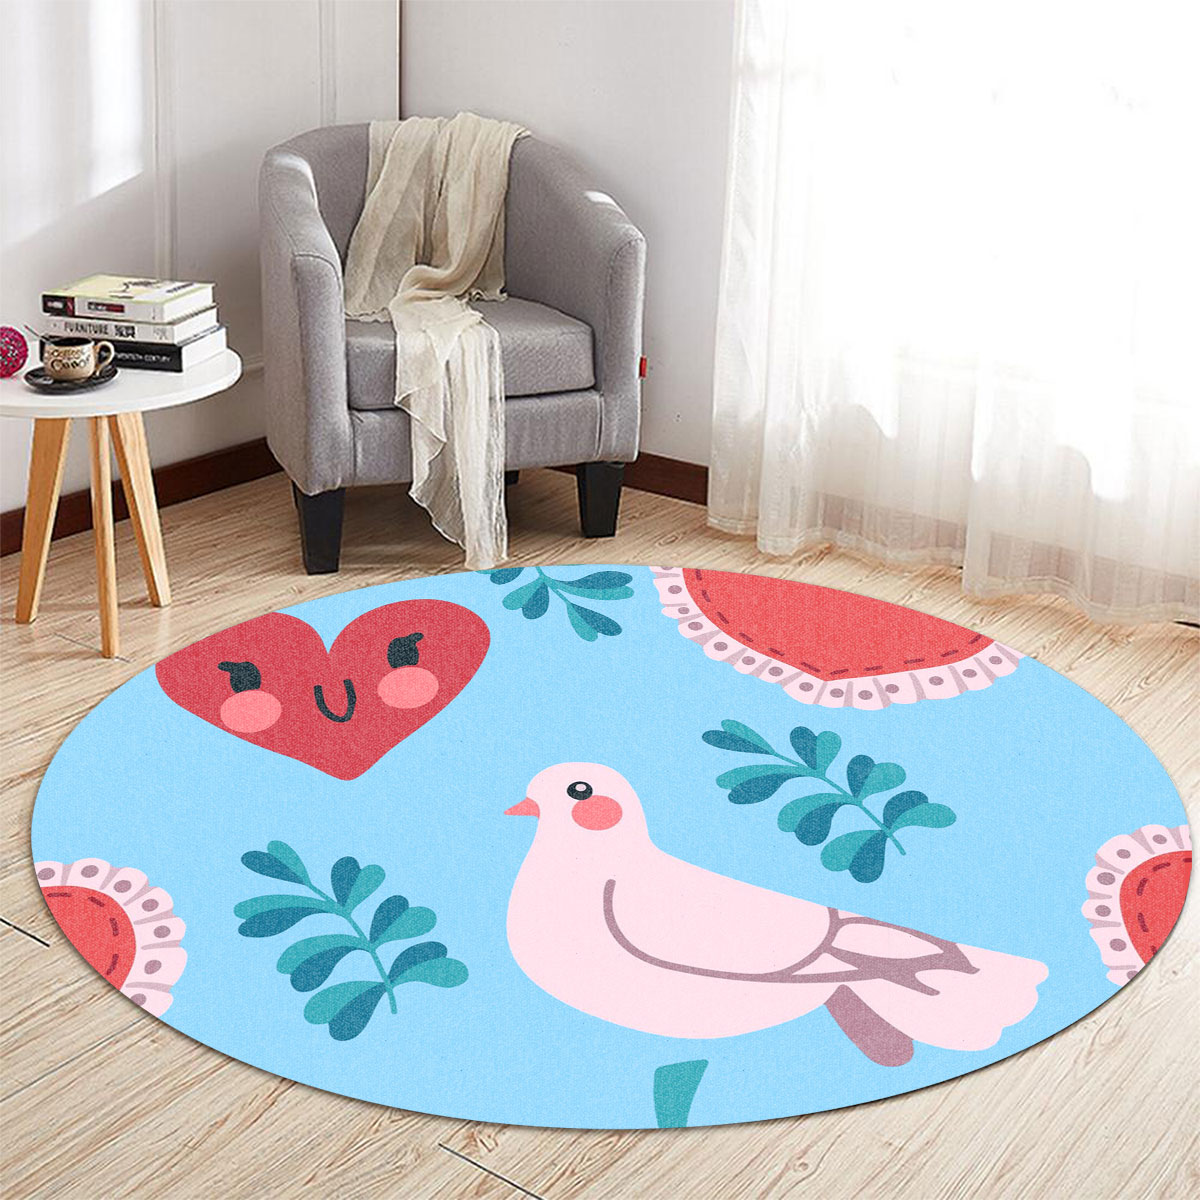 Coon Pink Dove He Round Carpet 6